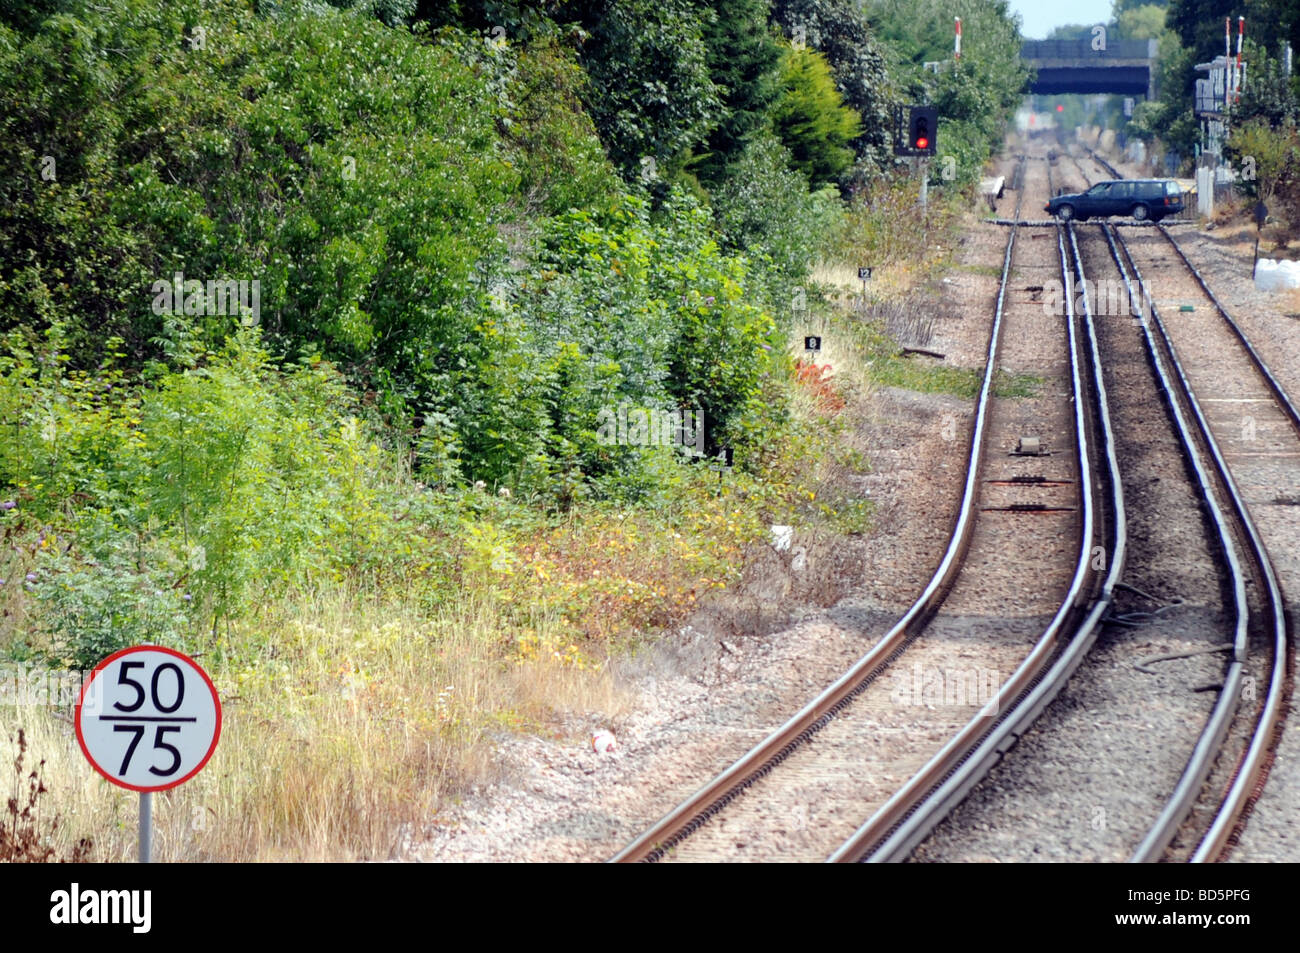 Royalty free photograph of railway tracks with car on the level crossing in London UK Stock Photo